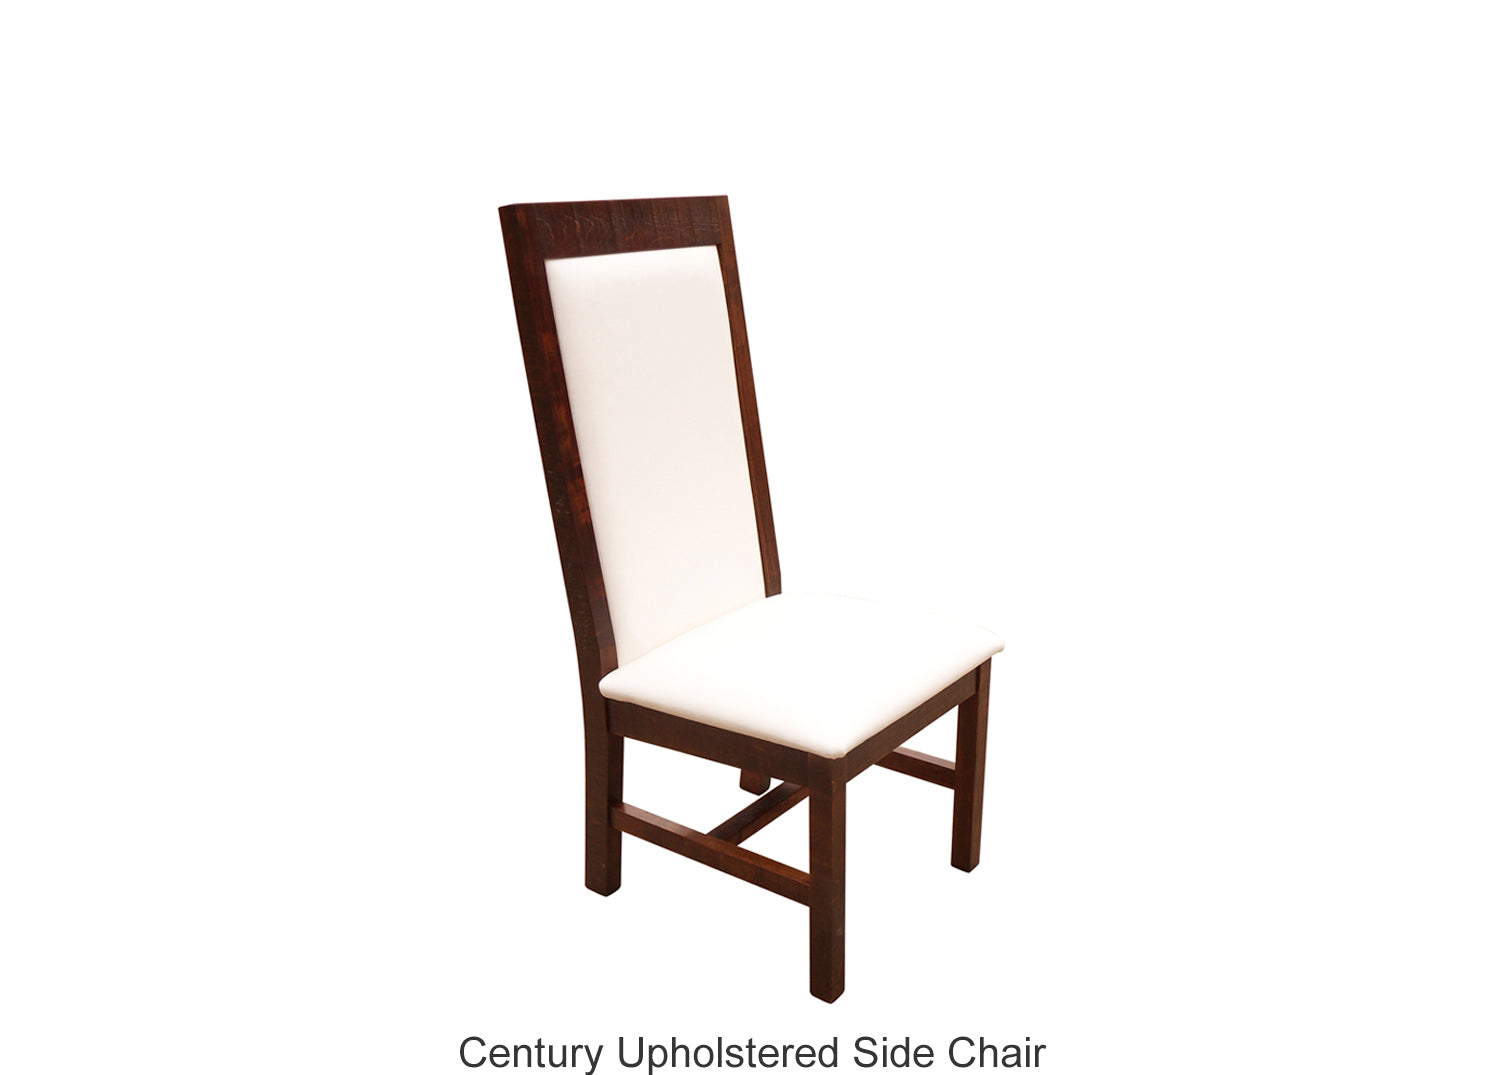 Century Upholstered Side Chair